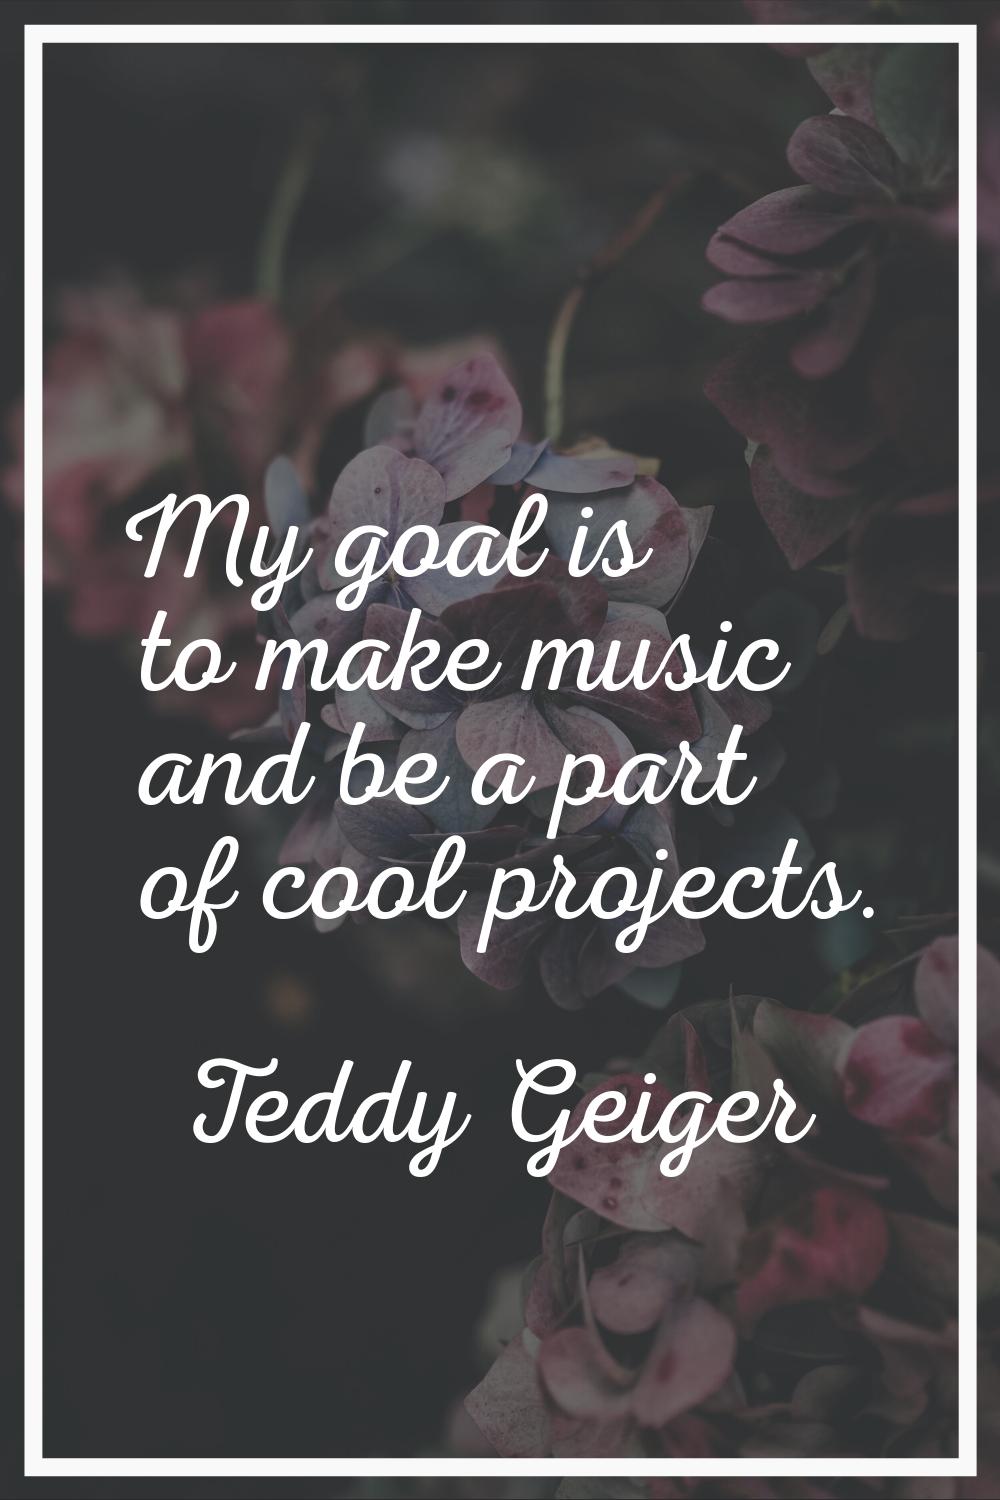 My goal is to make music and be a part of cool projects.